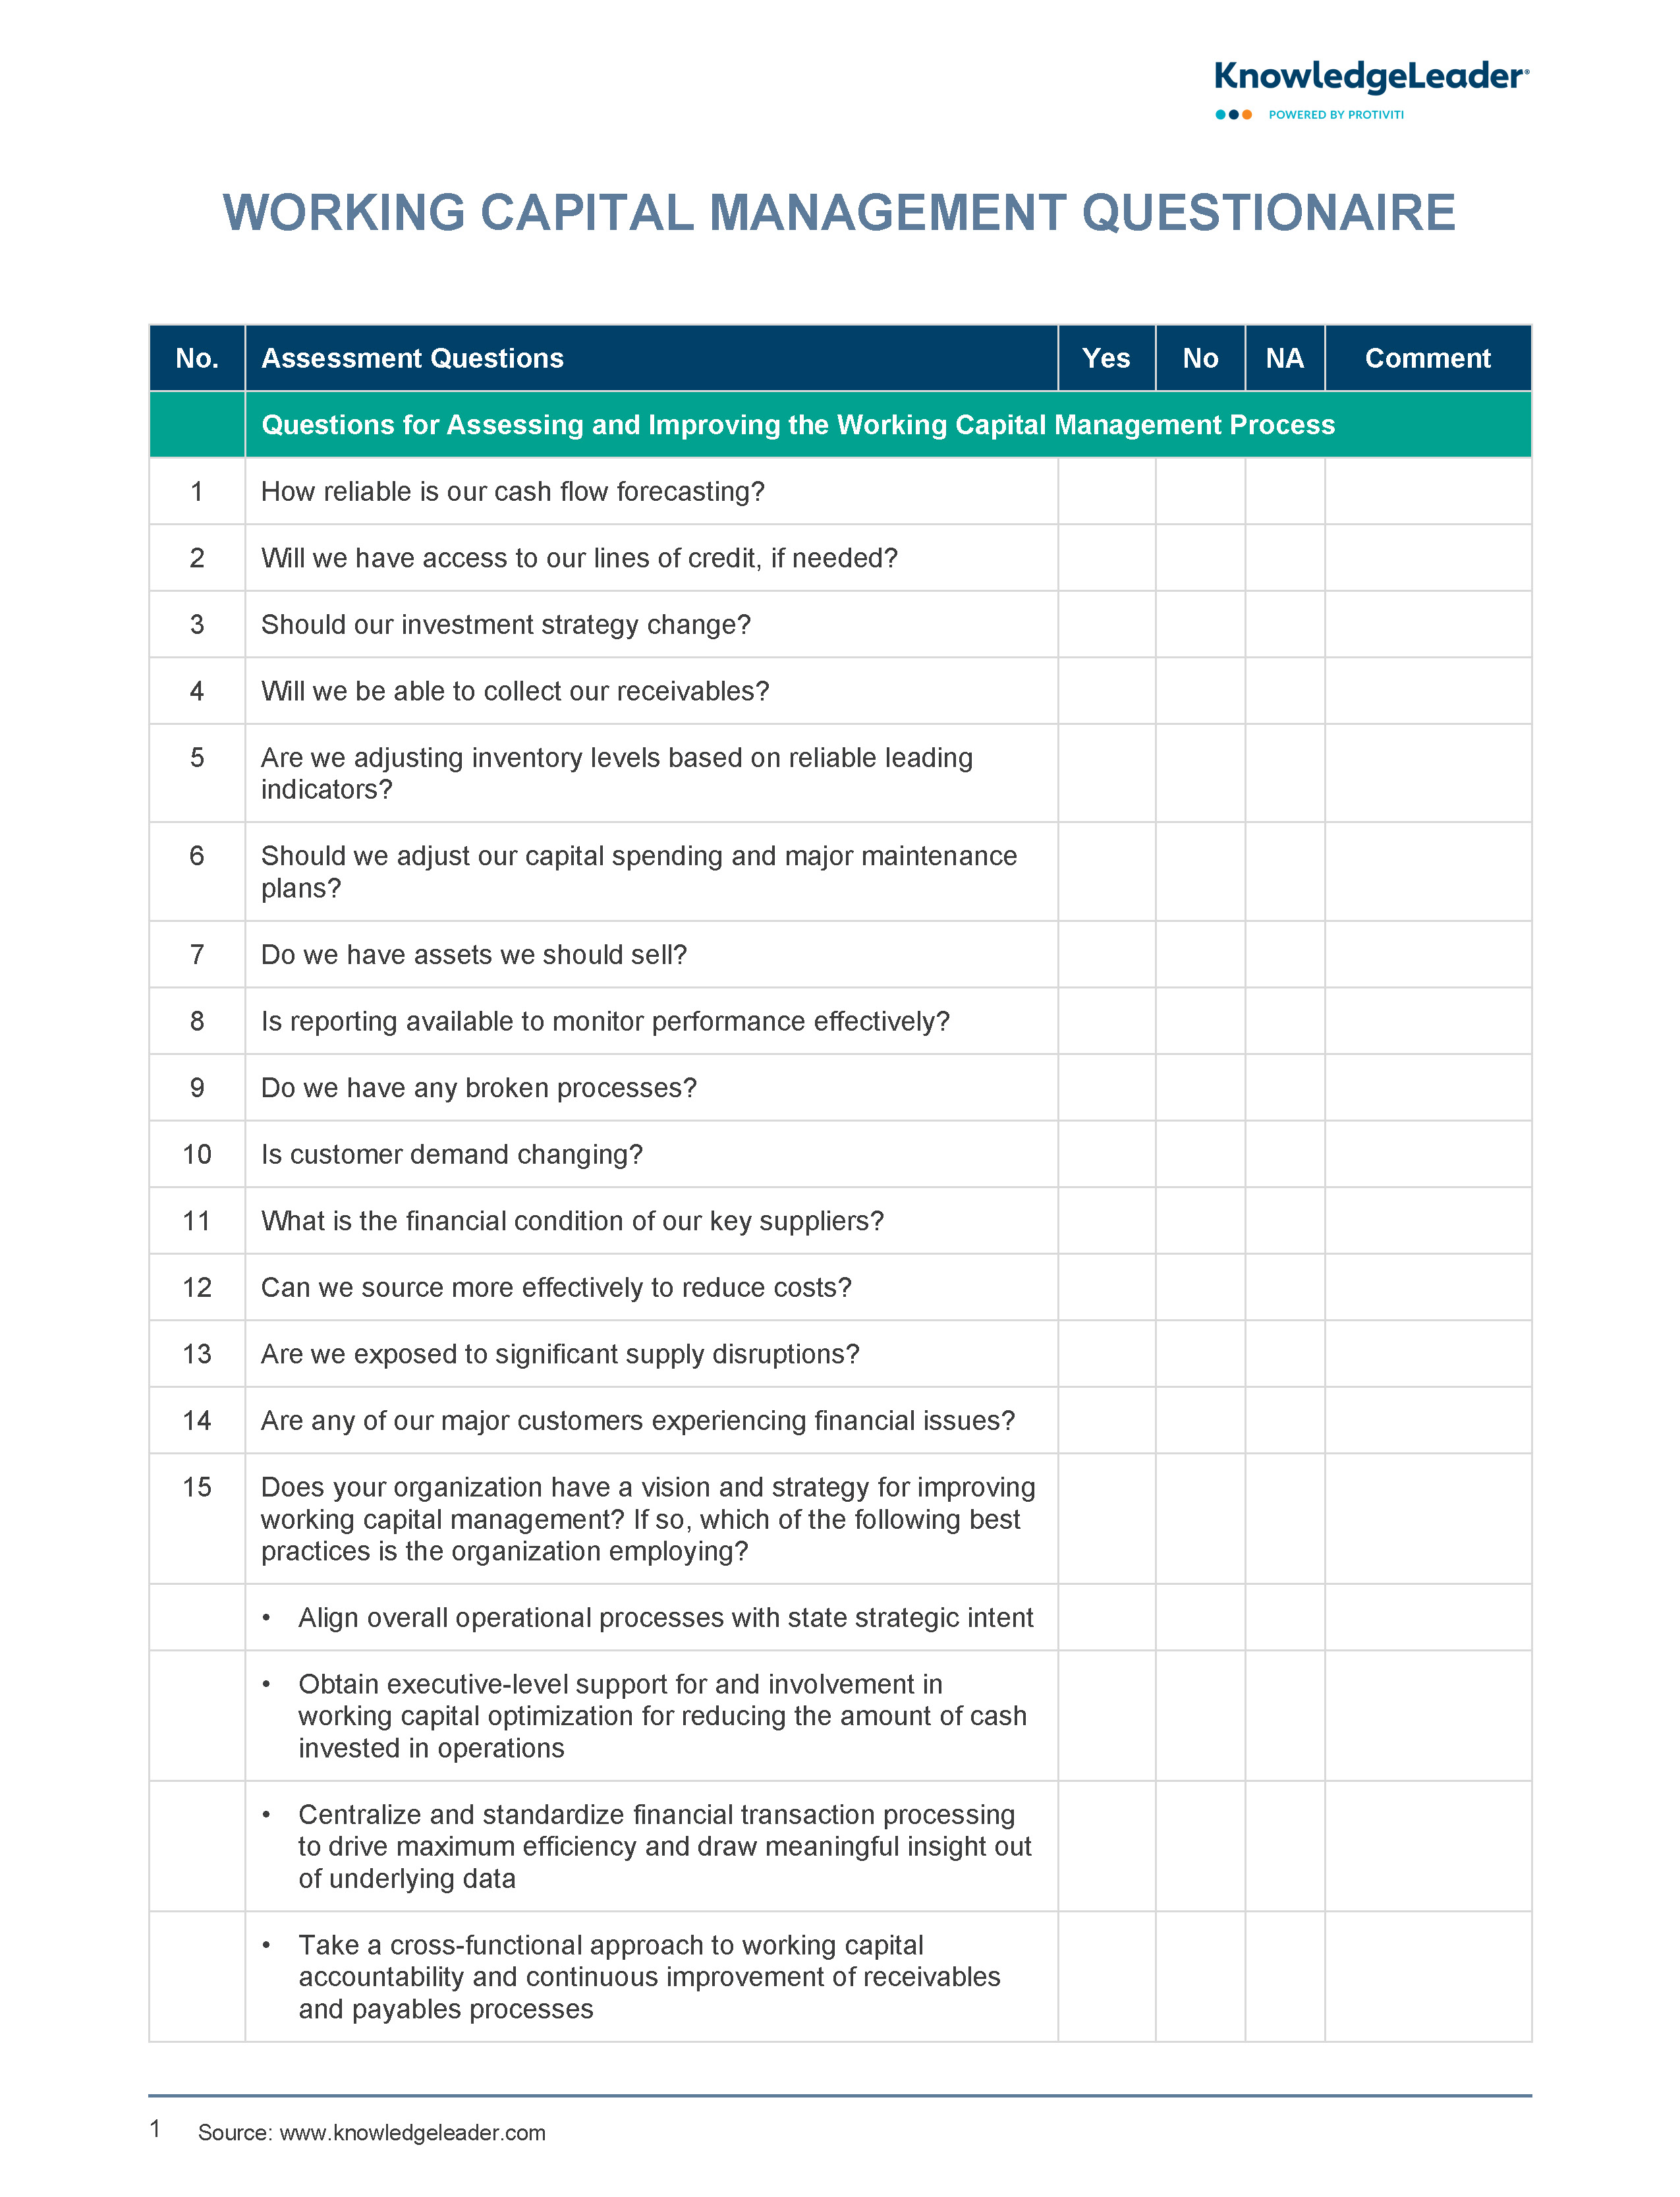 Screenshot of the first page of Working Capital Management Questionnaire